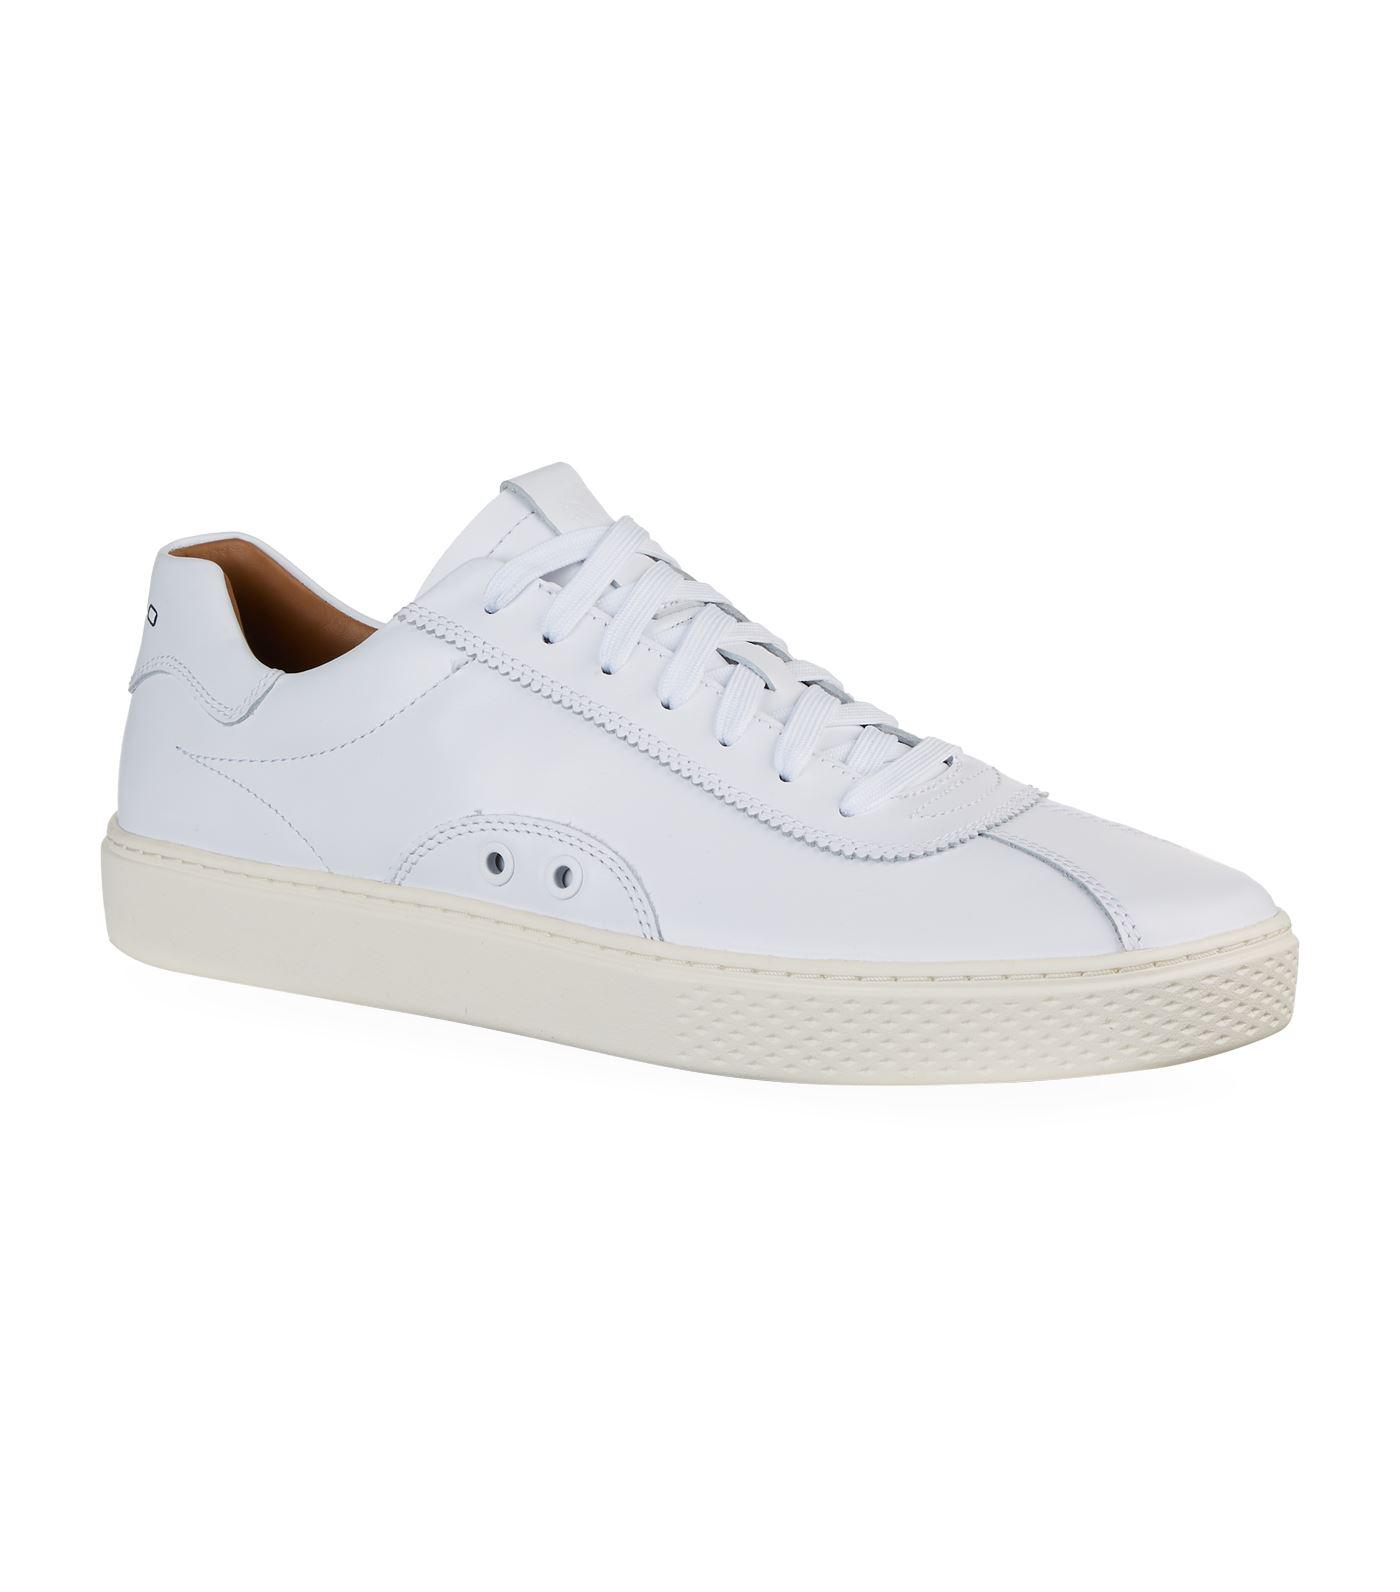 Polo Ralph Lauren Court 100 Luxe Leather Sneakers in White for Men - Lyst